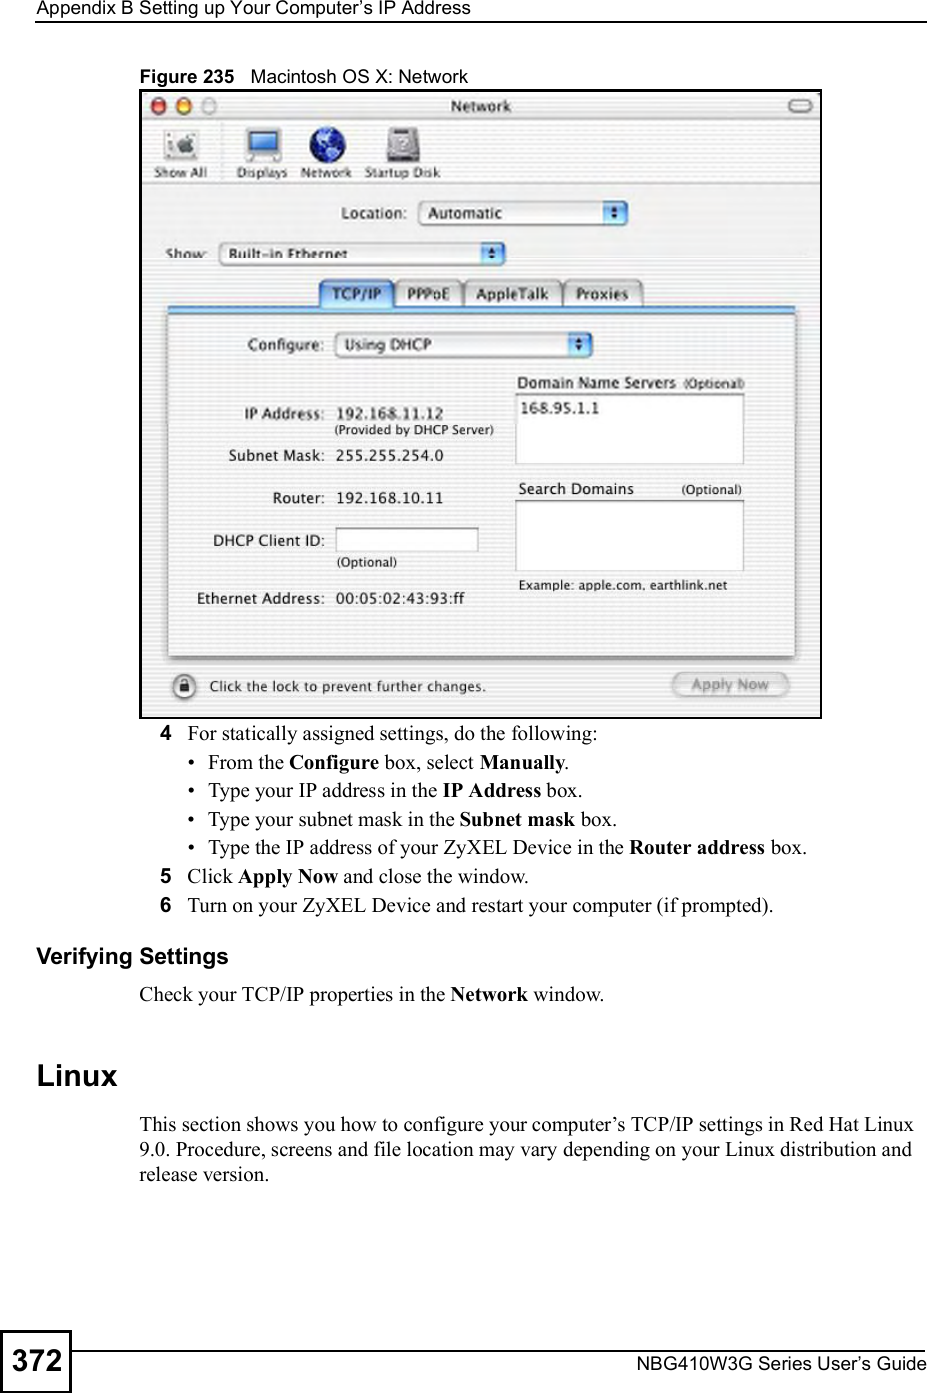 Appendix BSetting up Your Computer s IP AddressNBG410W3G Series User s Guide372Figure 235   Macintosh OS X: Network4For statically assigned settings, do the following: From the Configure box, select Manually. Type your IP address in the IP Address box. Type your subnet mask in the Subnet mask box. Type the IP address of your ZyXEL Device in the Router address box.5Click Apply Now and close the window.6Turn on your ZyXEL Device and restart your computer (if prompted).Verifying SettingsCheck your TCP/IP properties in the Network window.Linux This section shows you how to configure your computer!s TCP/IP settings in Red Hat Linux 9.0. Procedure, screens and file location may vary depending on your Linux distribution and release version. 